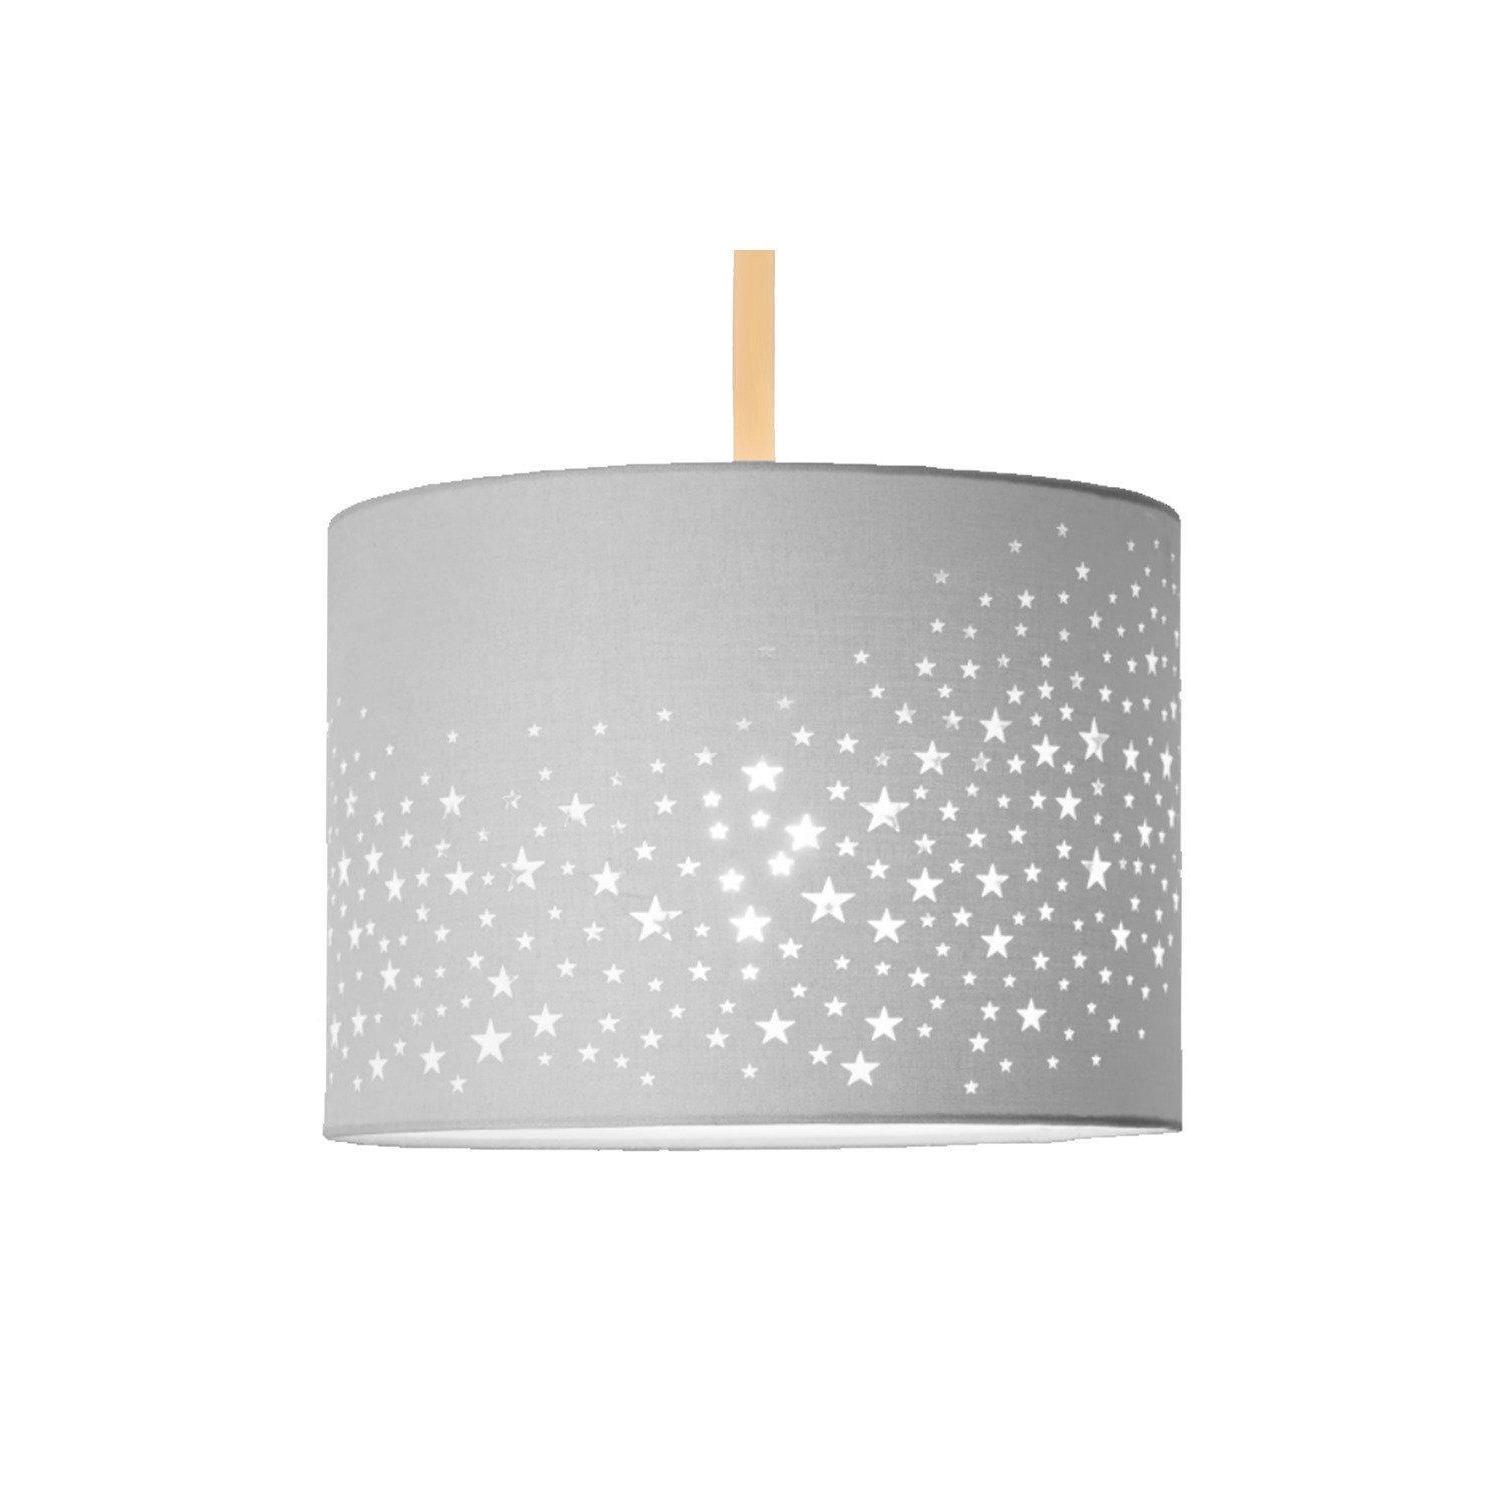 'Stardust' Grey Star Easy Fit  Ceiling Lamp Shade - image 1